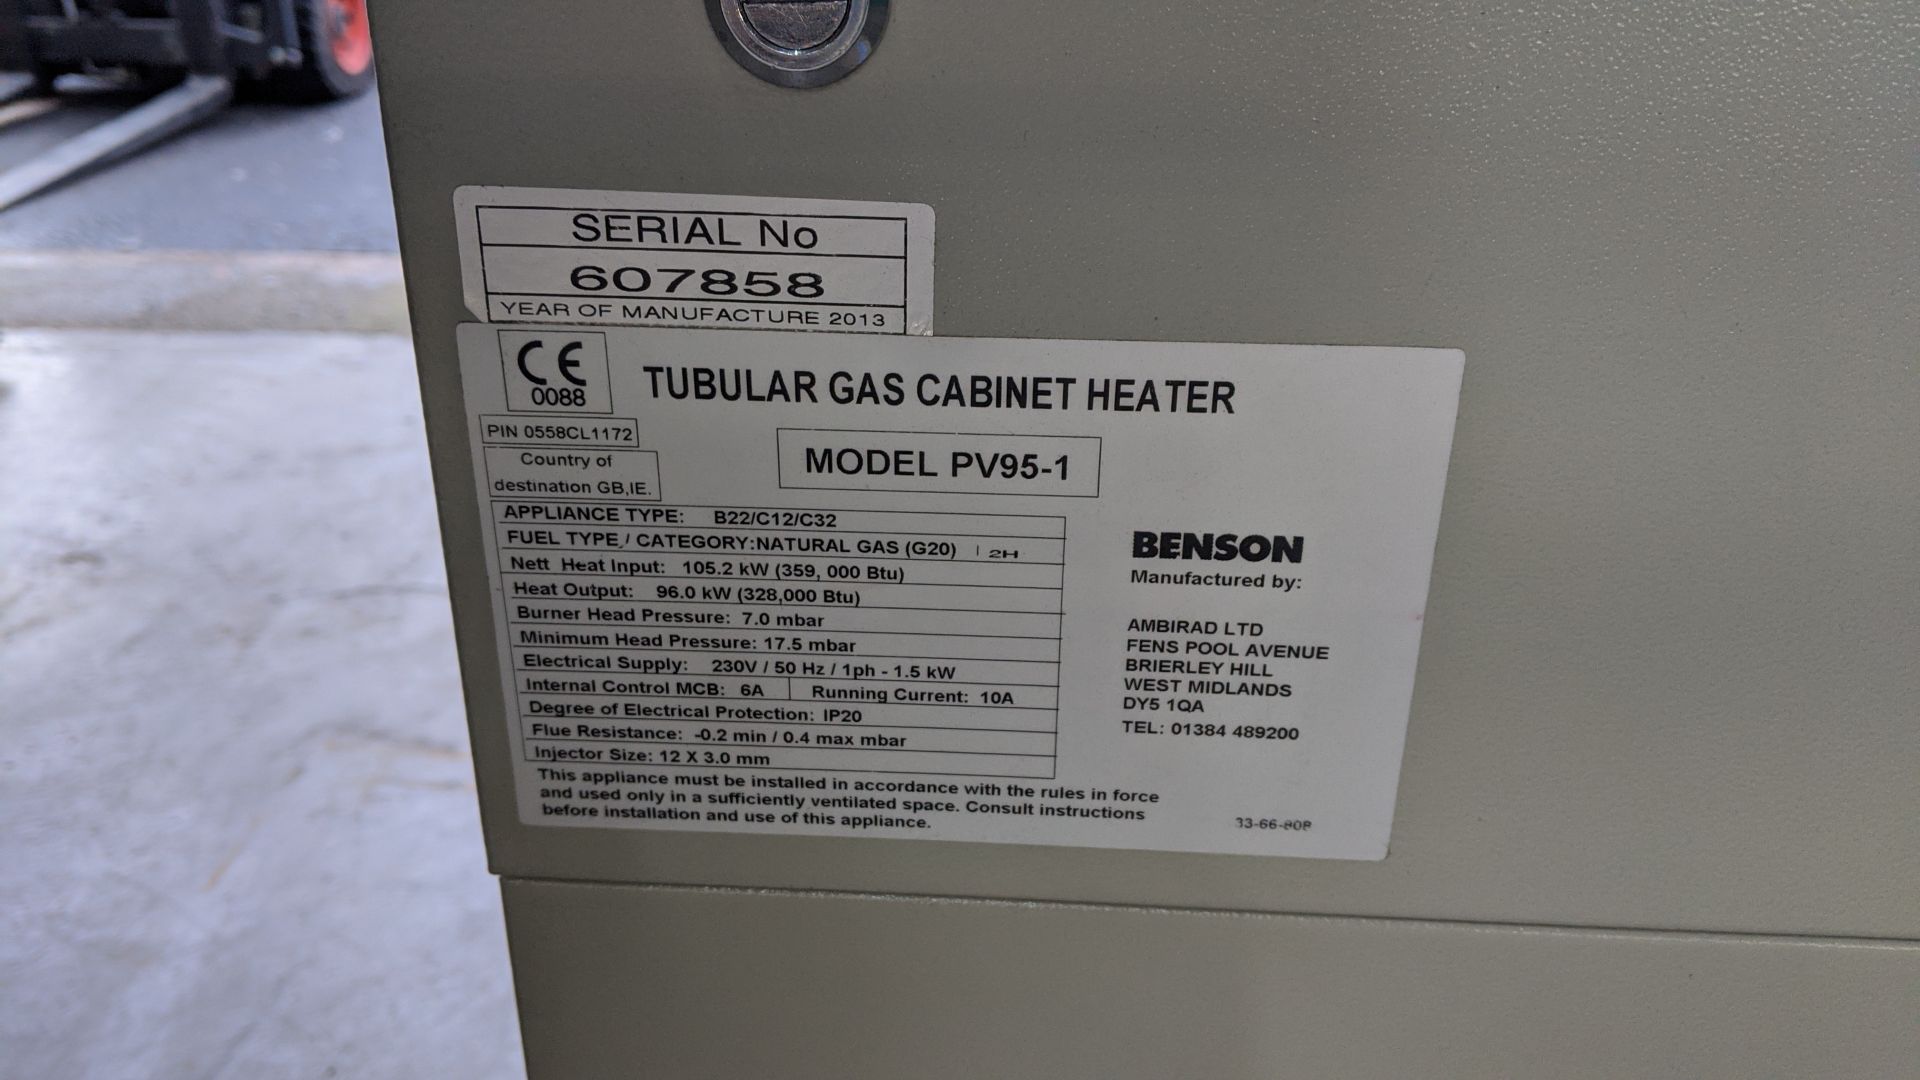 Benson tubular gas cabinet heater model PV95-1 serial no. 607858 with digital control panel. This - Image 12 of 17